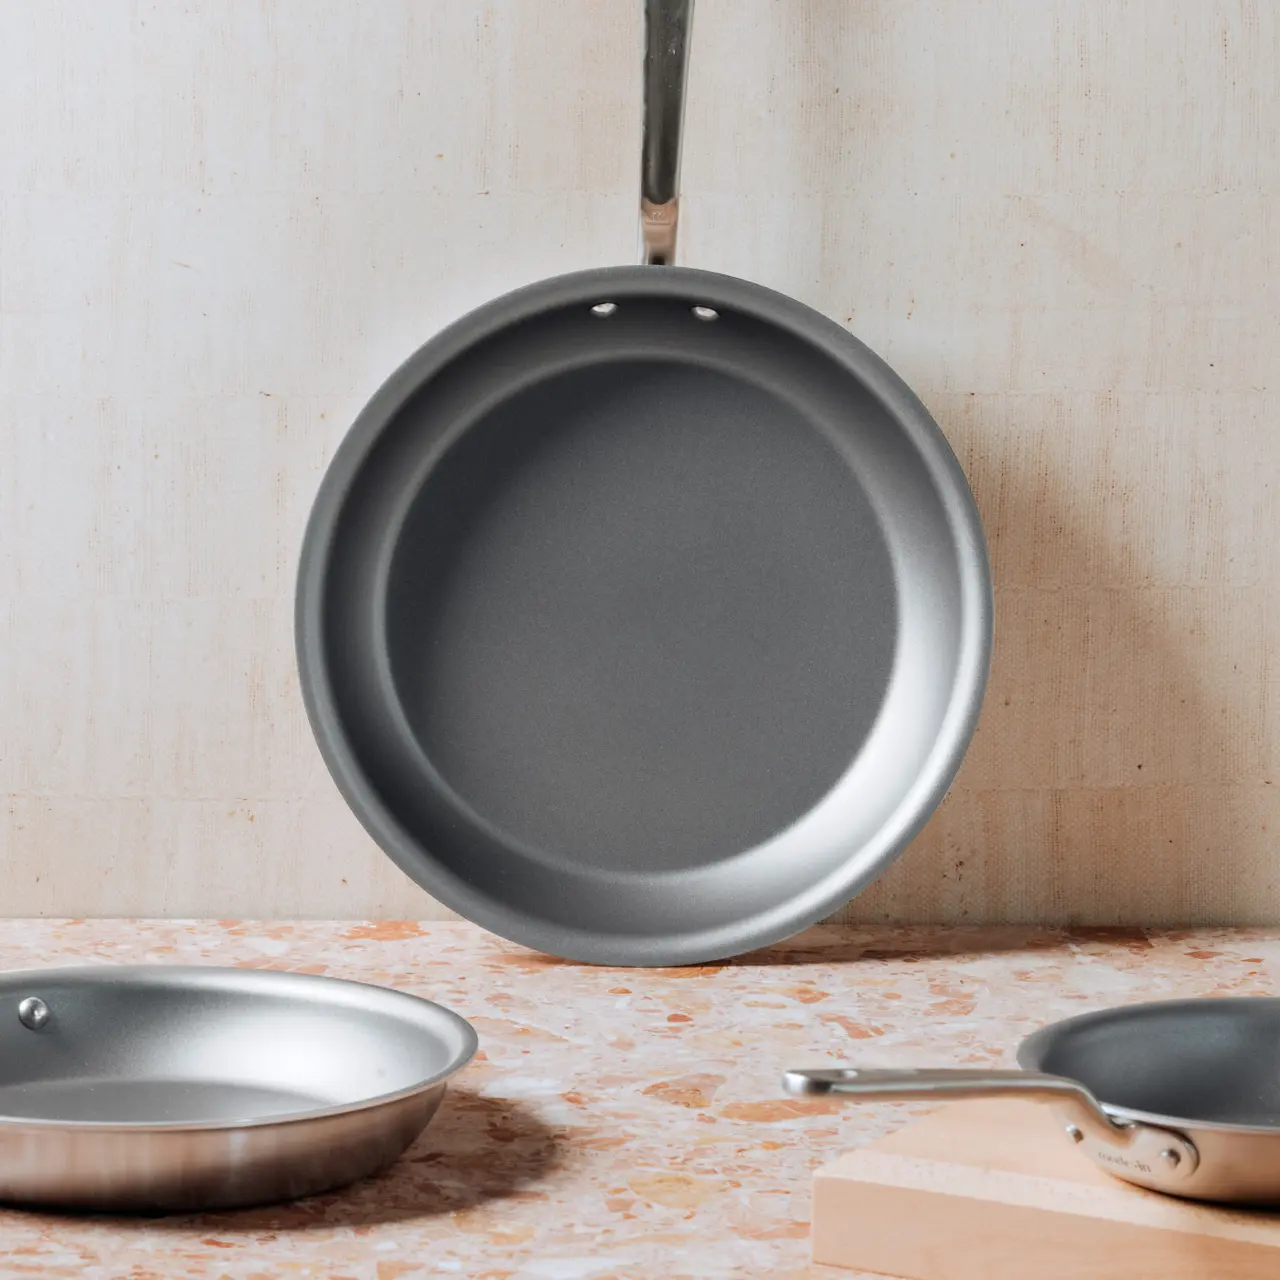 A non-stick frying pan hangs against a neutral backdrop with two other pans resting on a surface nearby.